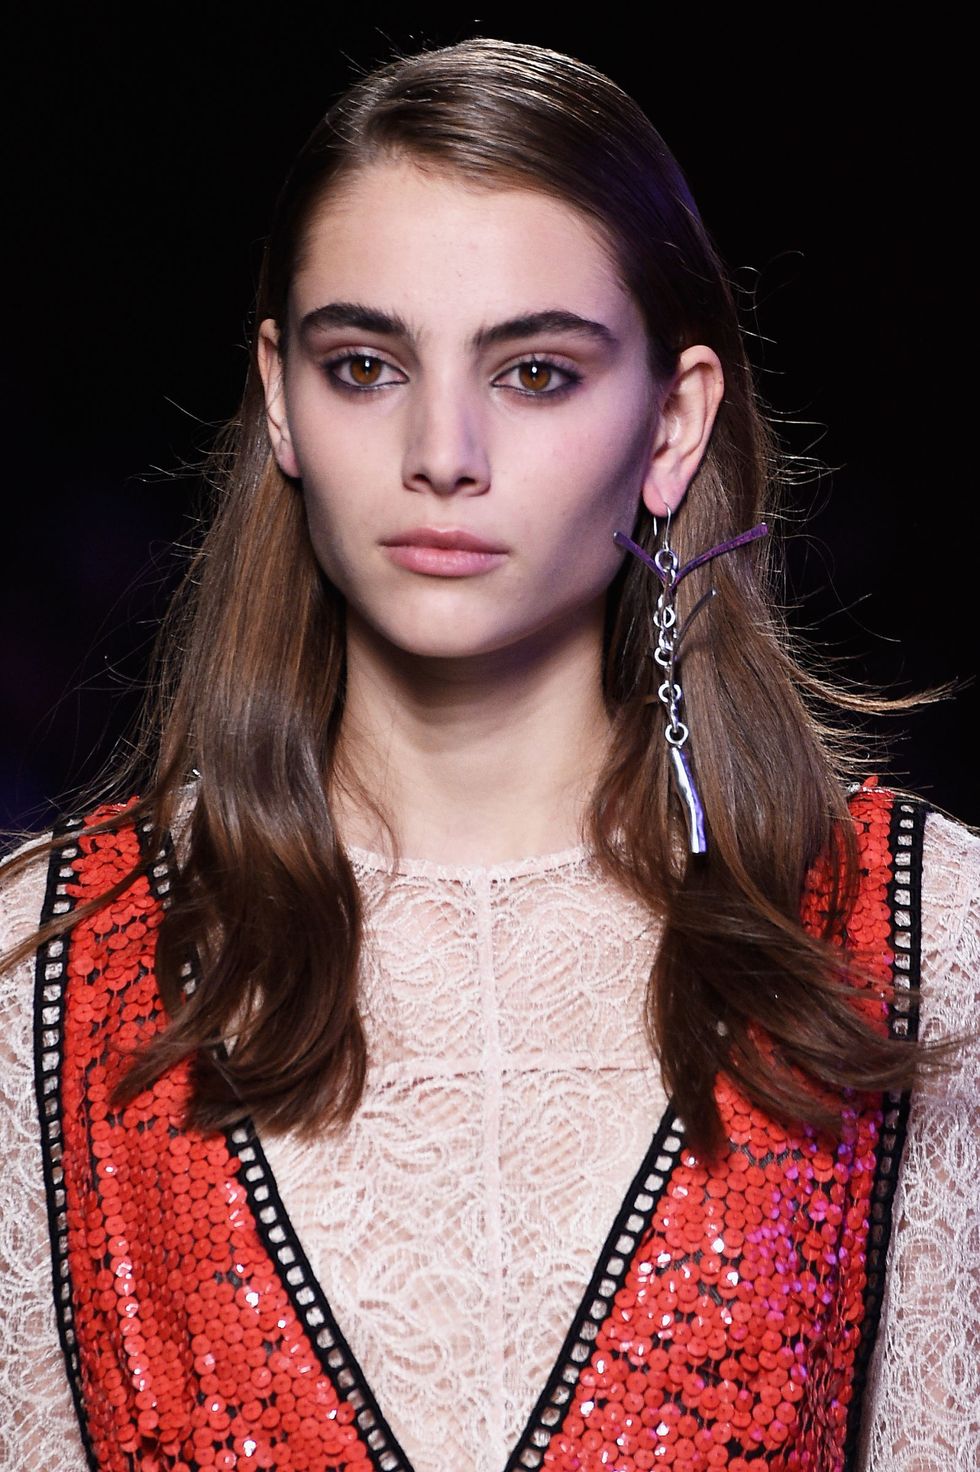 Emilio Pucci Spring/Summer 2016 hair and makeup trends